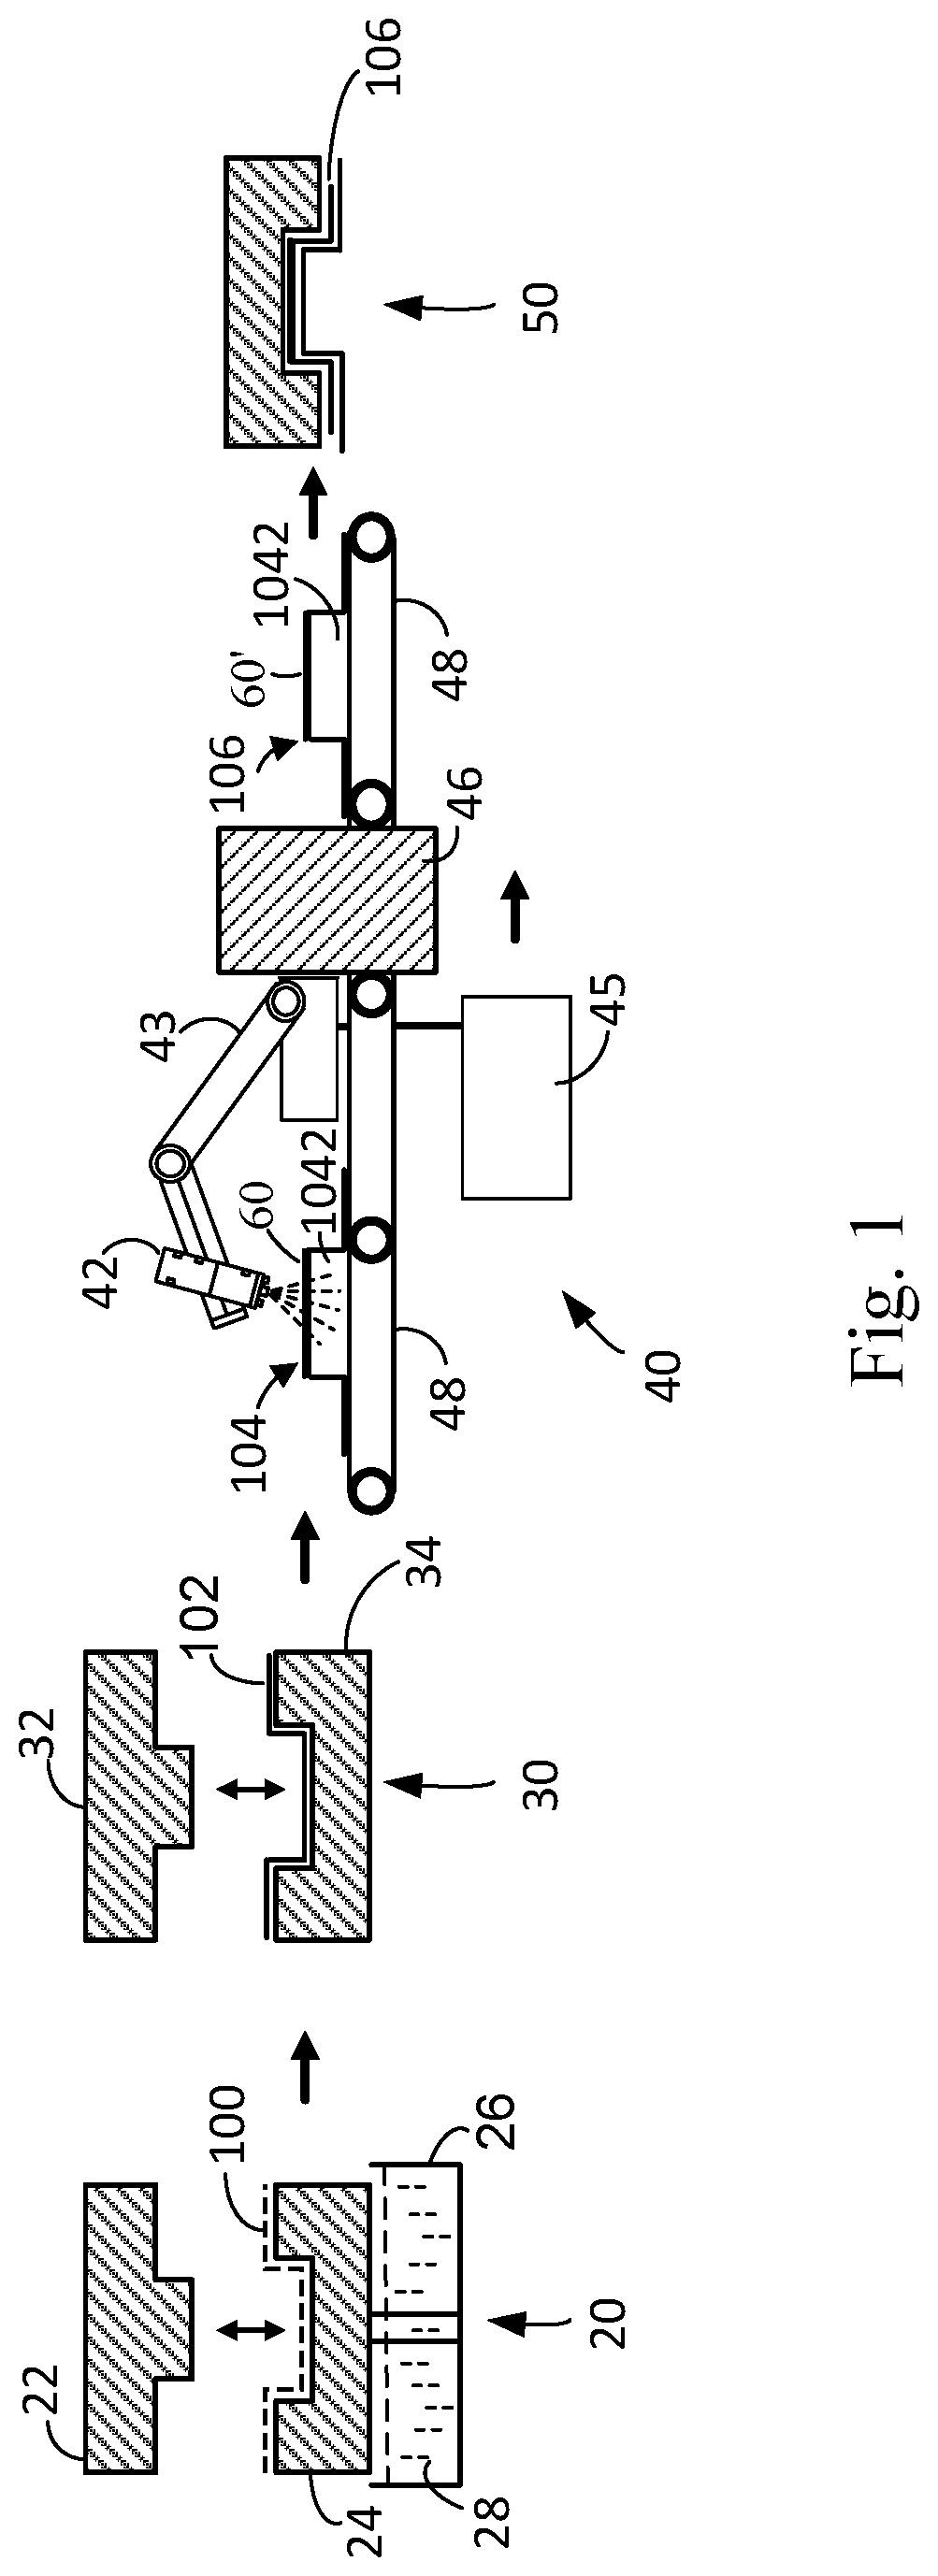 Method for fabricating shaped paper products